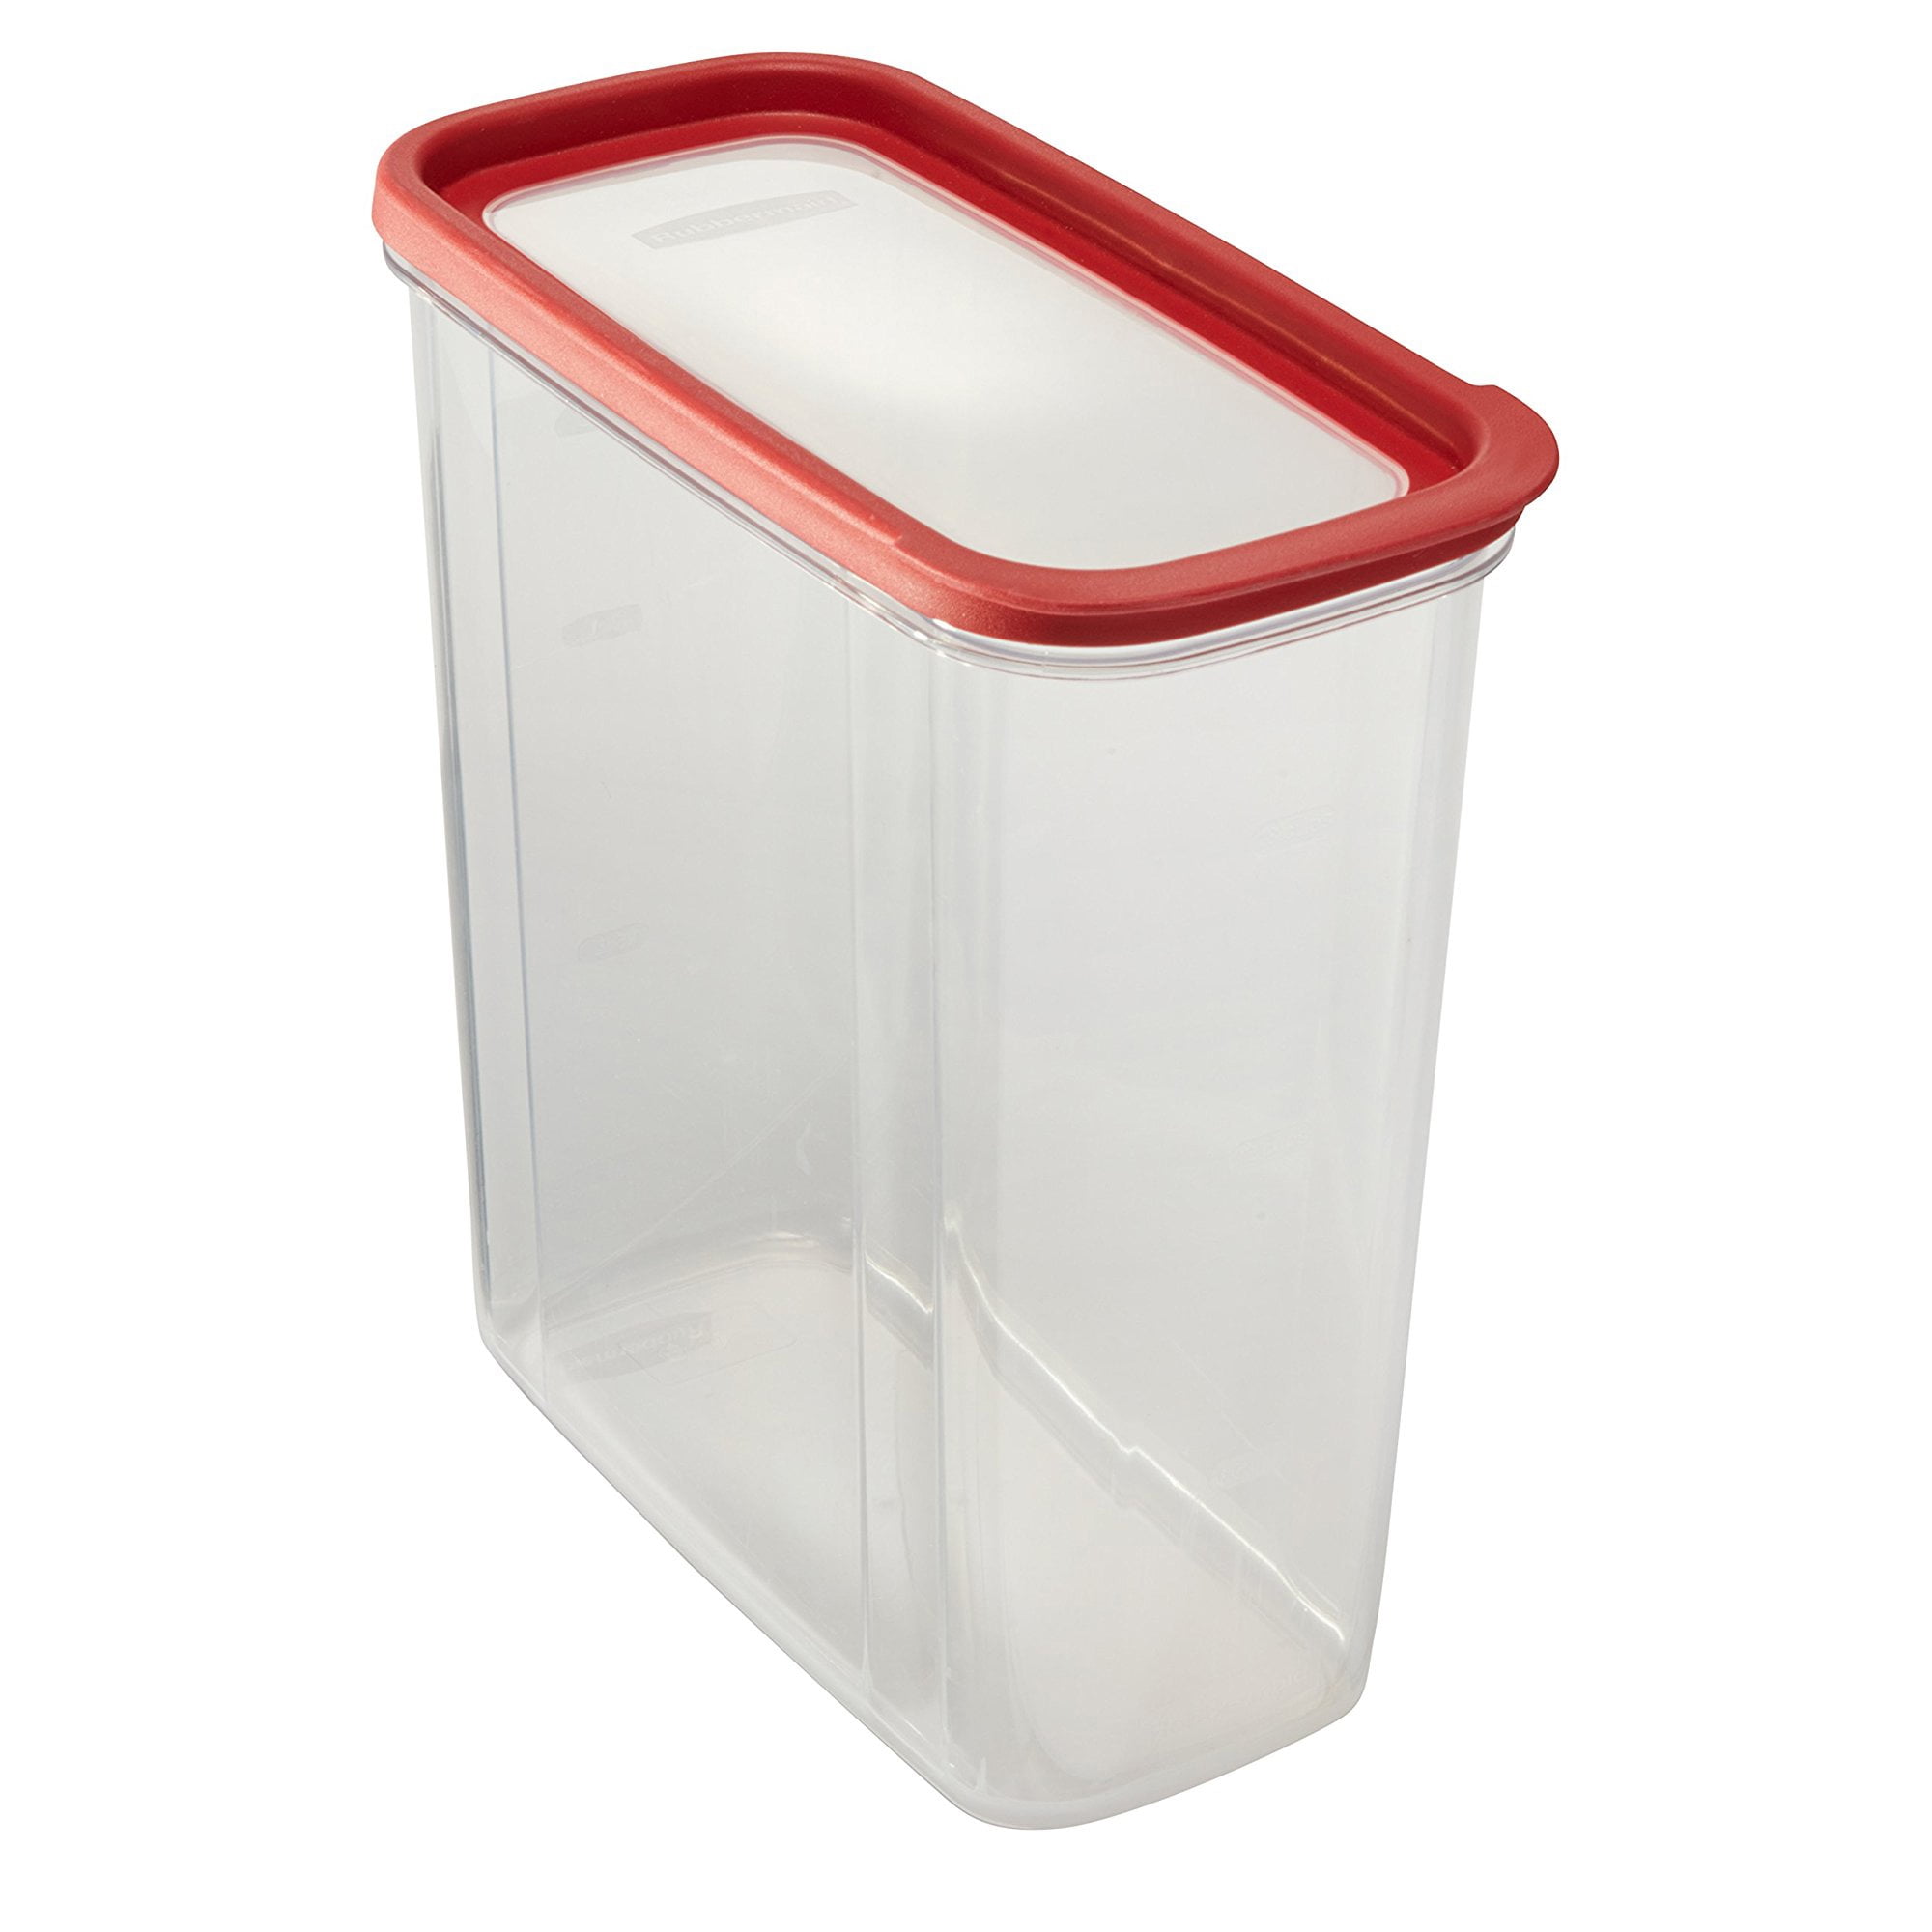 21 cup MODULAR CANISTER LARGE Storage Container BPA Free Plastic RUBBERMAID  7M74